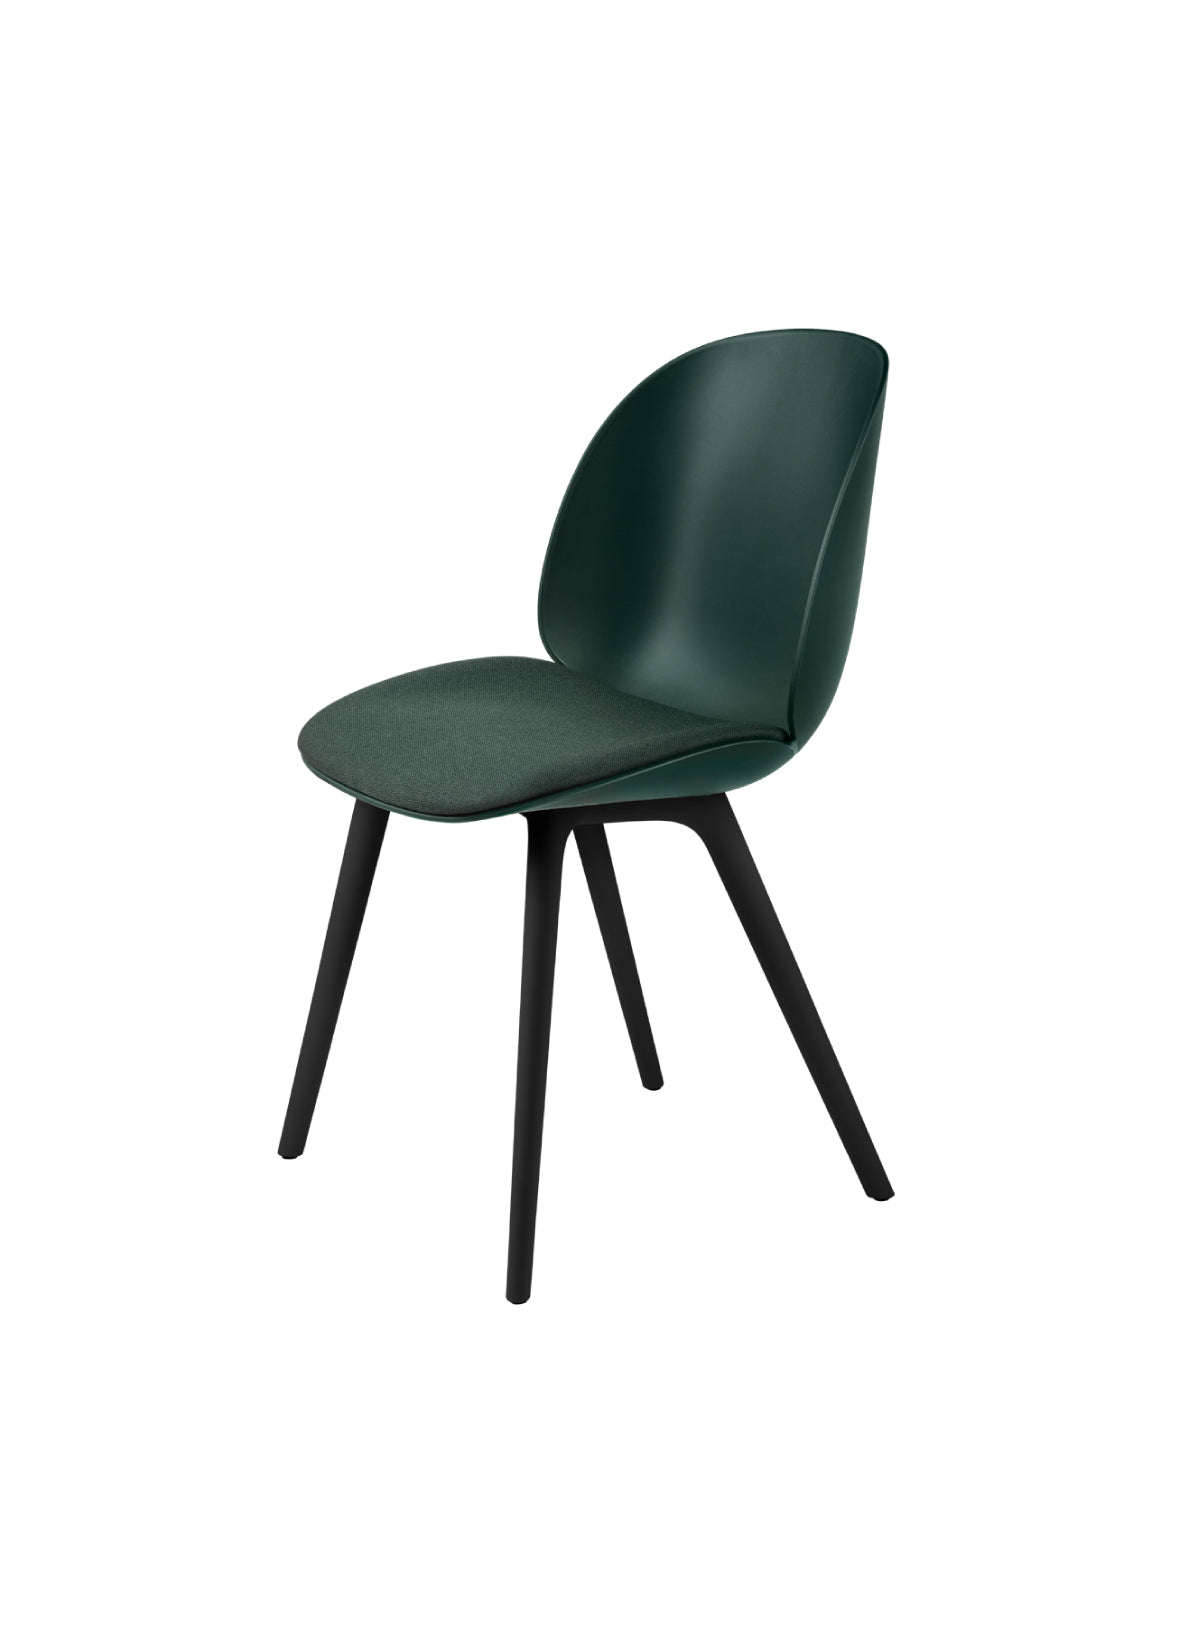 Beetle Dining Chair - Seat Upholstered - Plastic Base by Gubi